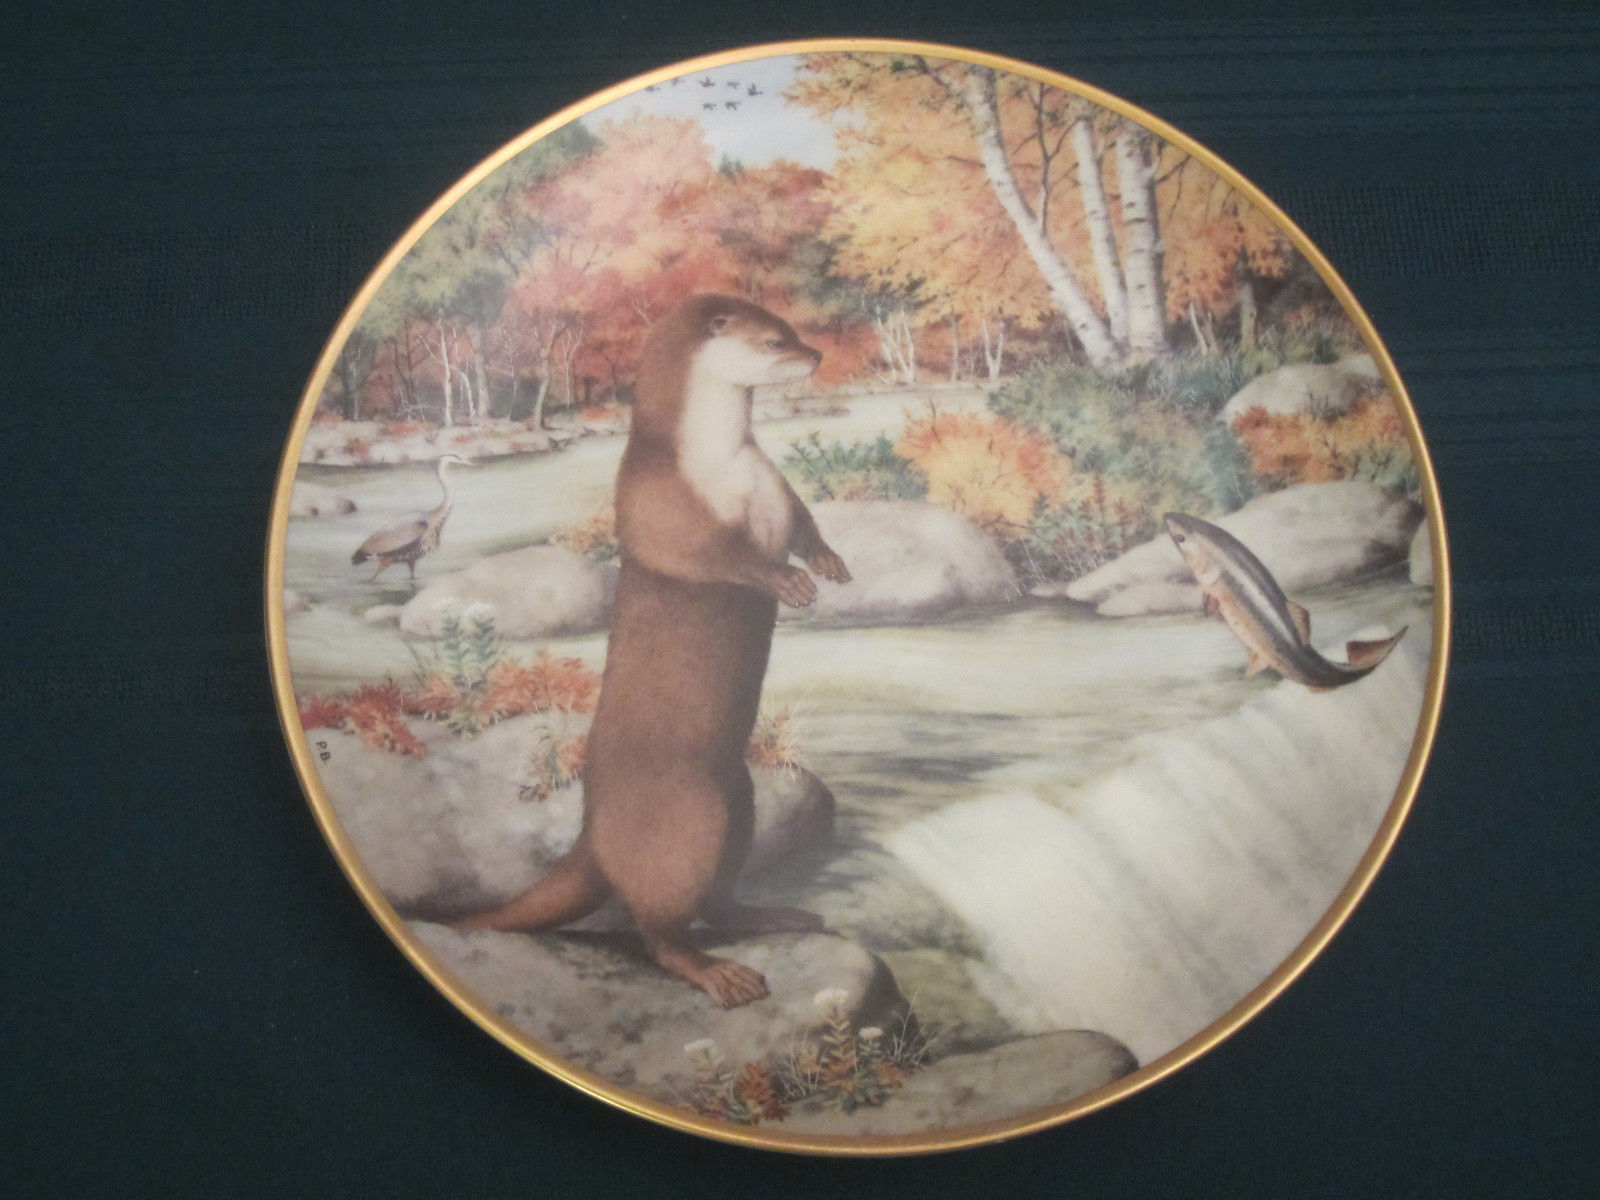 Primary image for OTTER Collector Plate PETER BARRATT September THE WOODLAND YEAR Franklin Mint